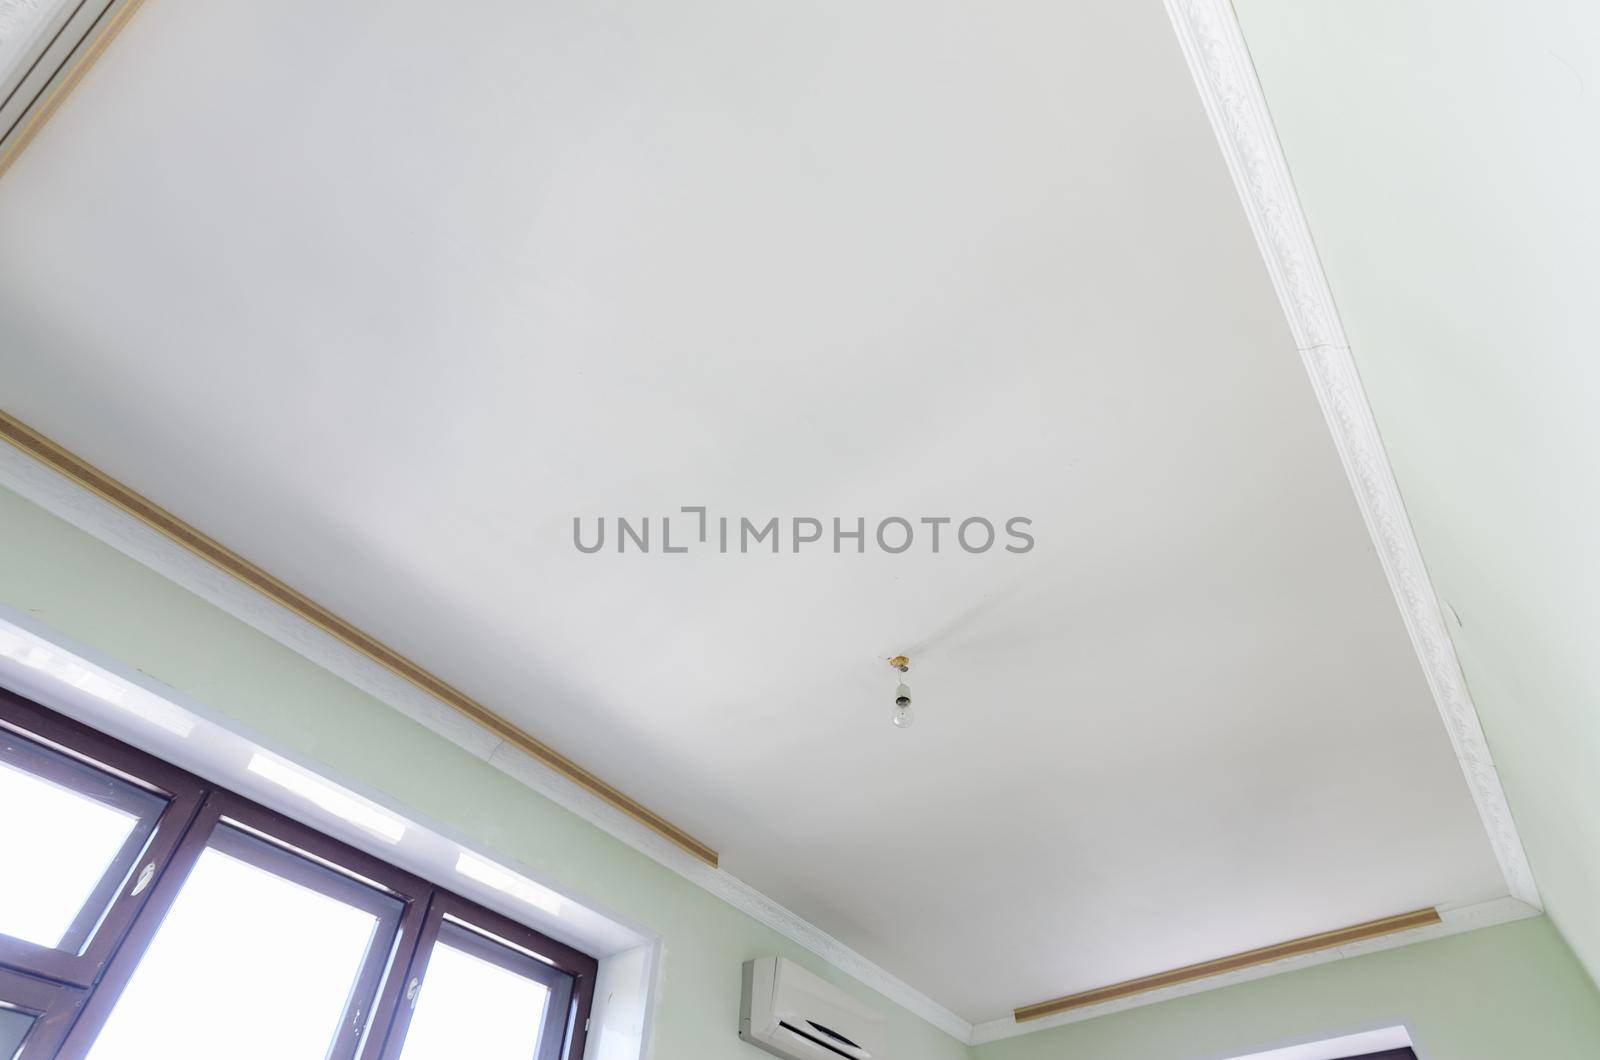 Plastered white ceiling in the room, a temporary light bulb hangs on the ceiling by Madhourse